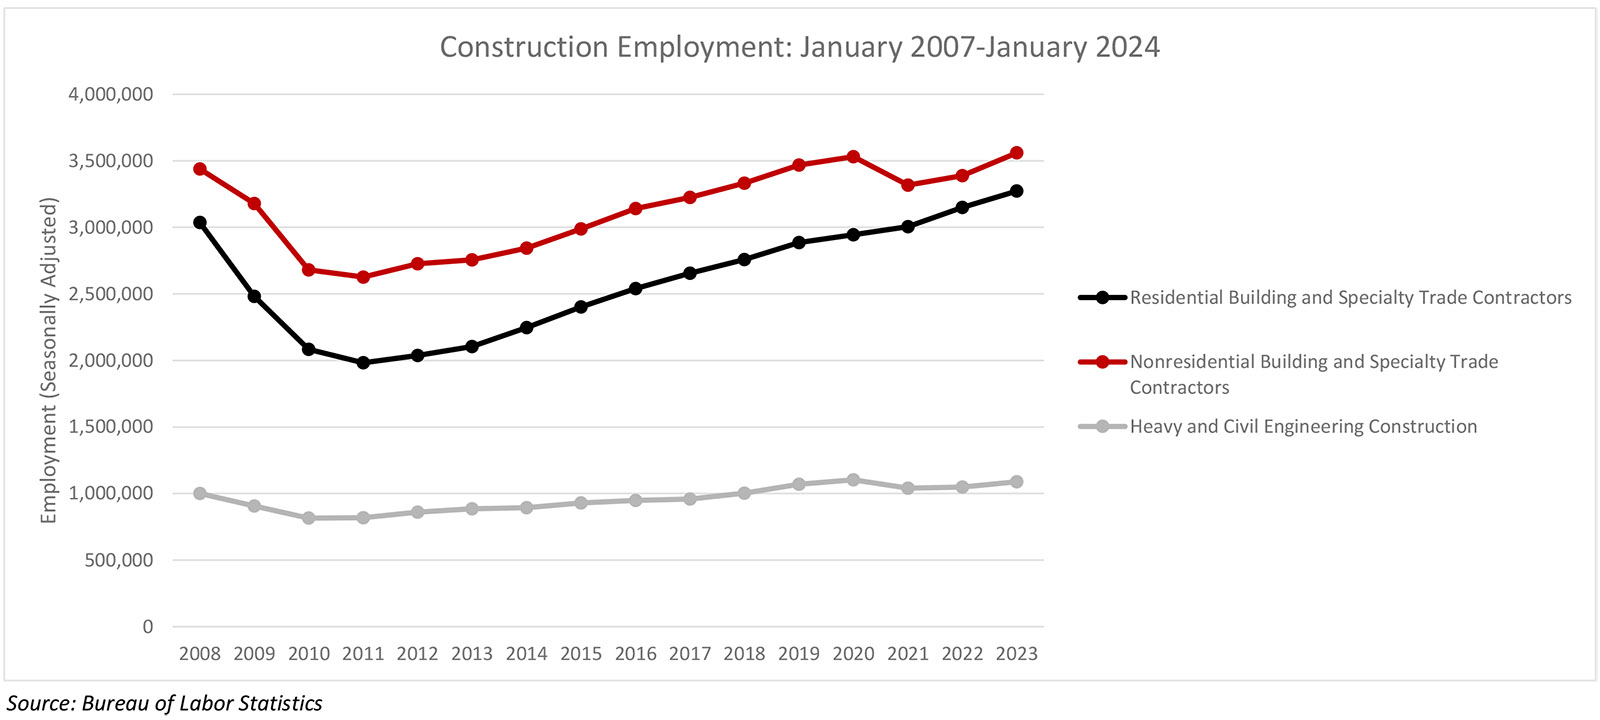 Nonresidential Construction Employment Increases in January